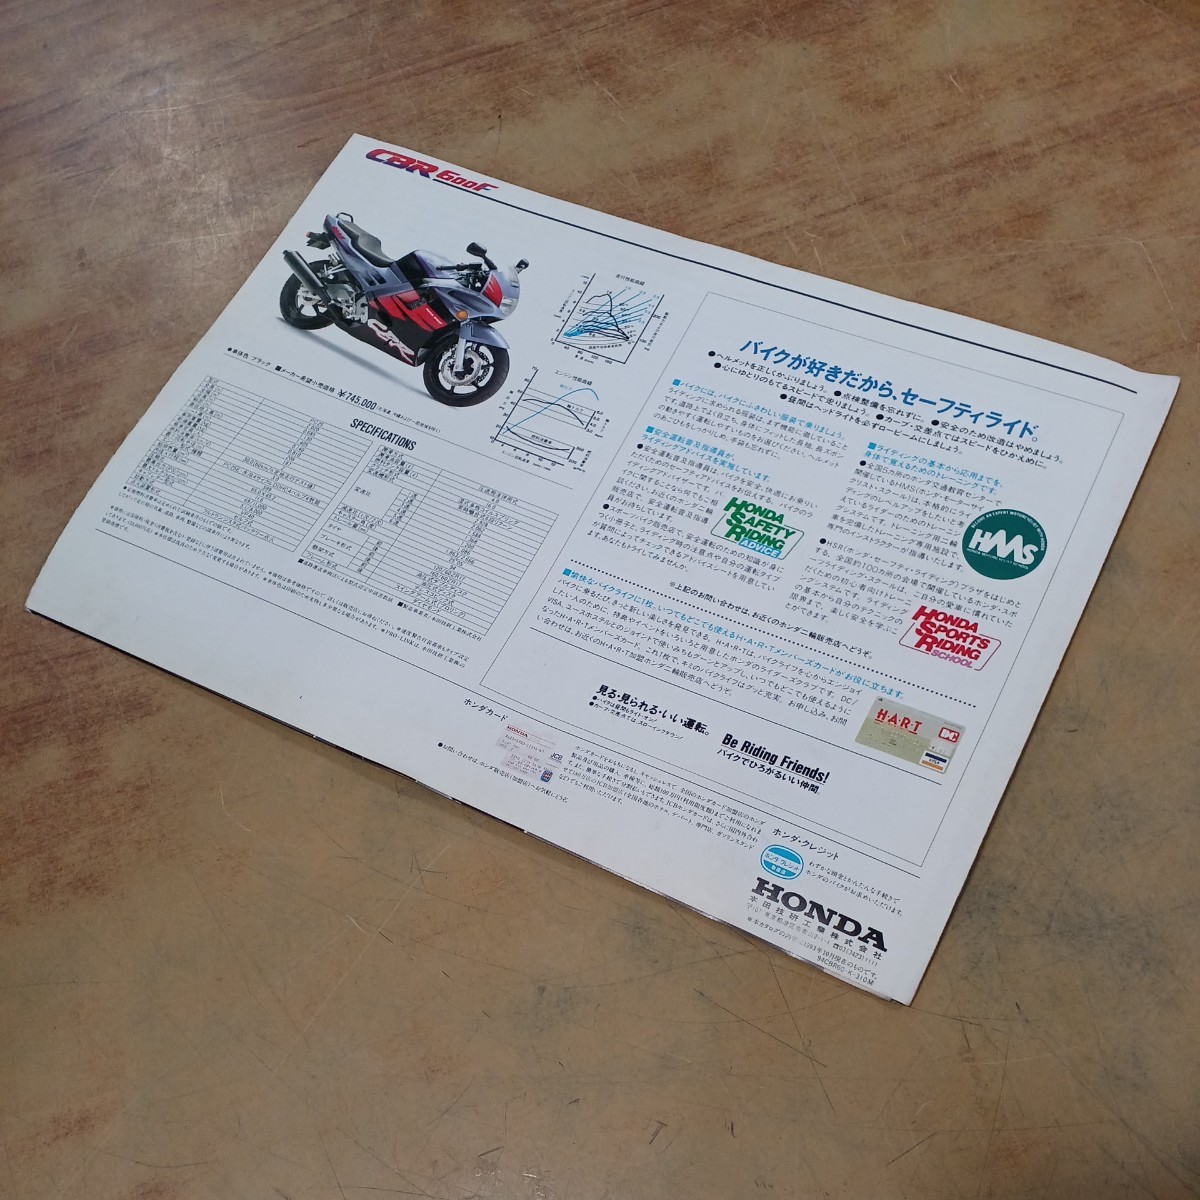 HONDA CBR that time thing catalog [ debut CBR 1000F][NEW CBR 600F]1993 year issue that time thing Honda shop bike used long-term keeping goods 